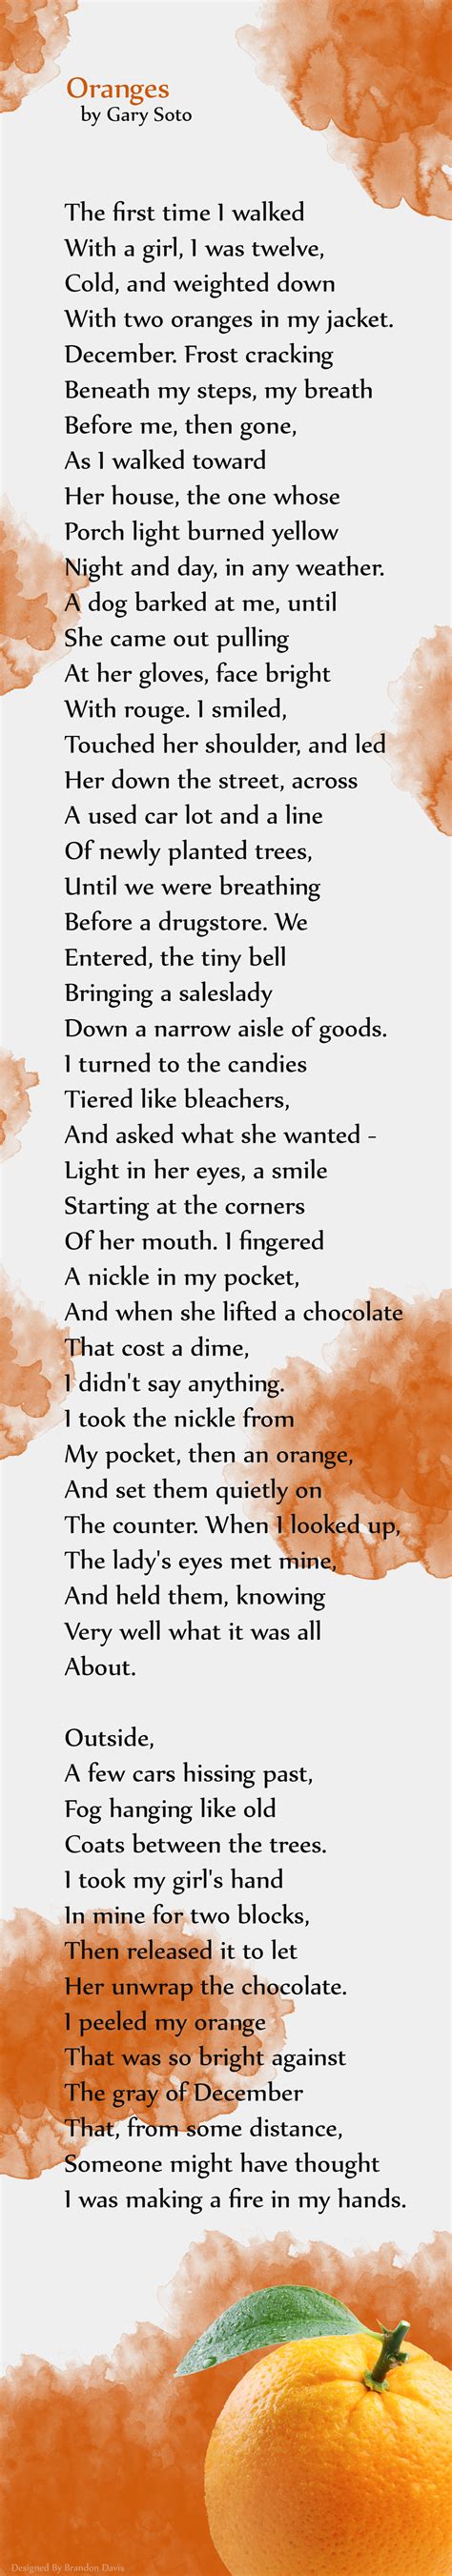 Oranges By Gary Soto Poetry Pinterest Author Studies And Language